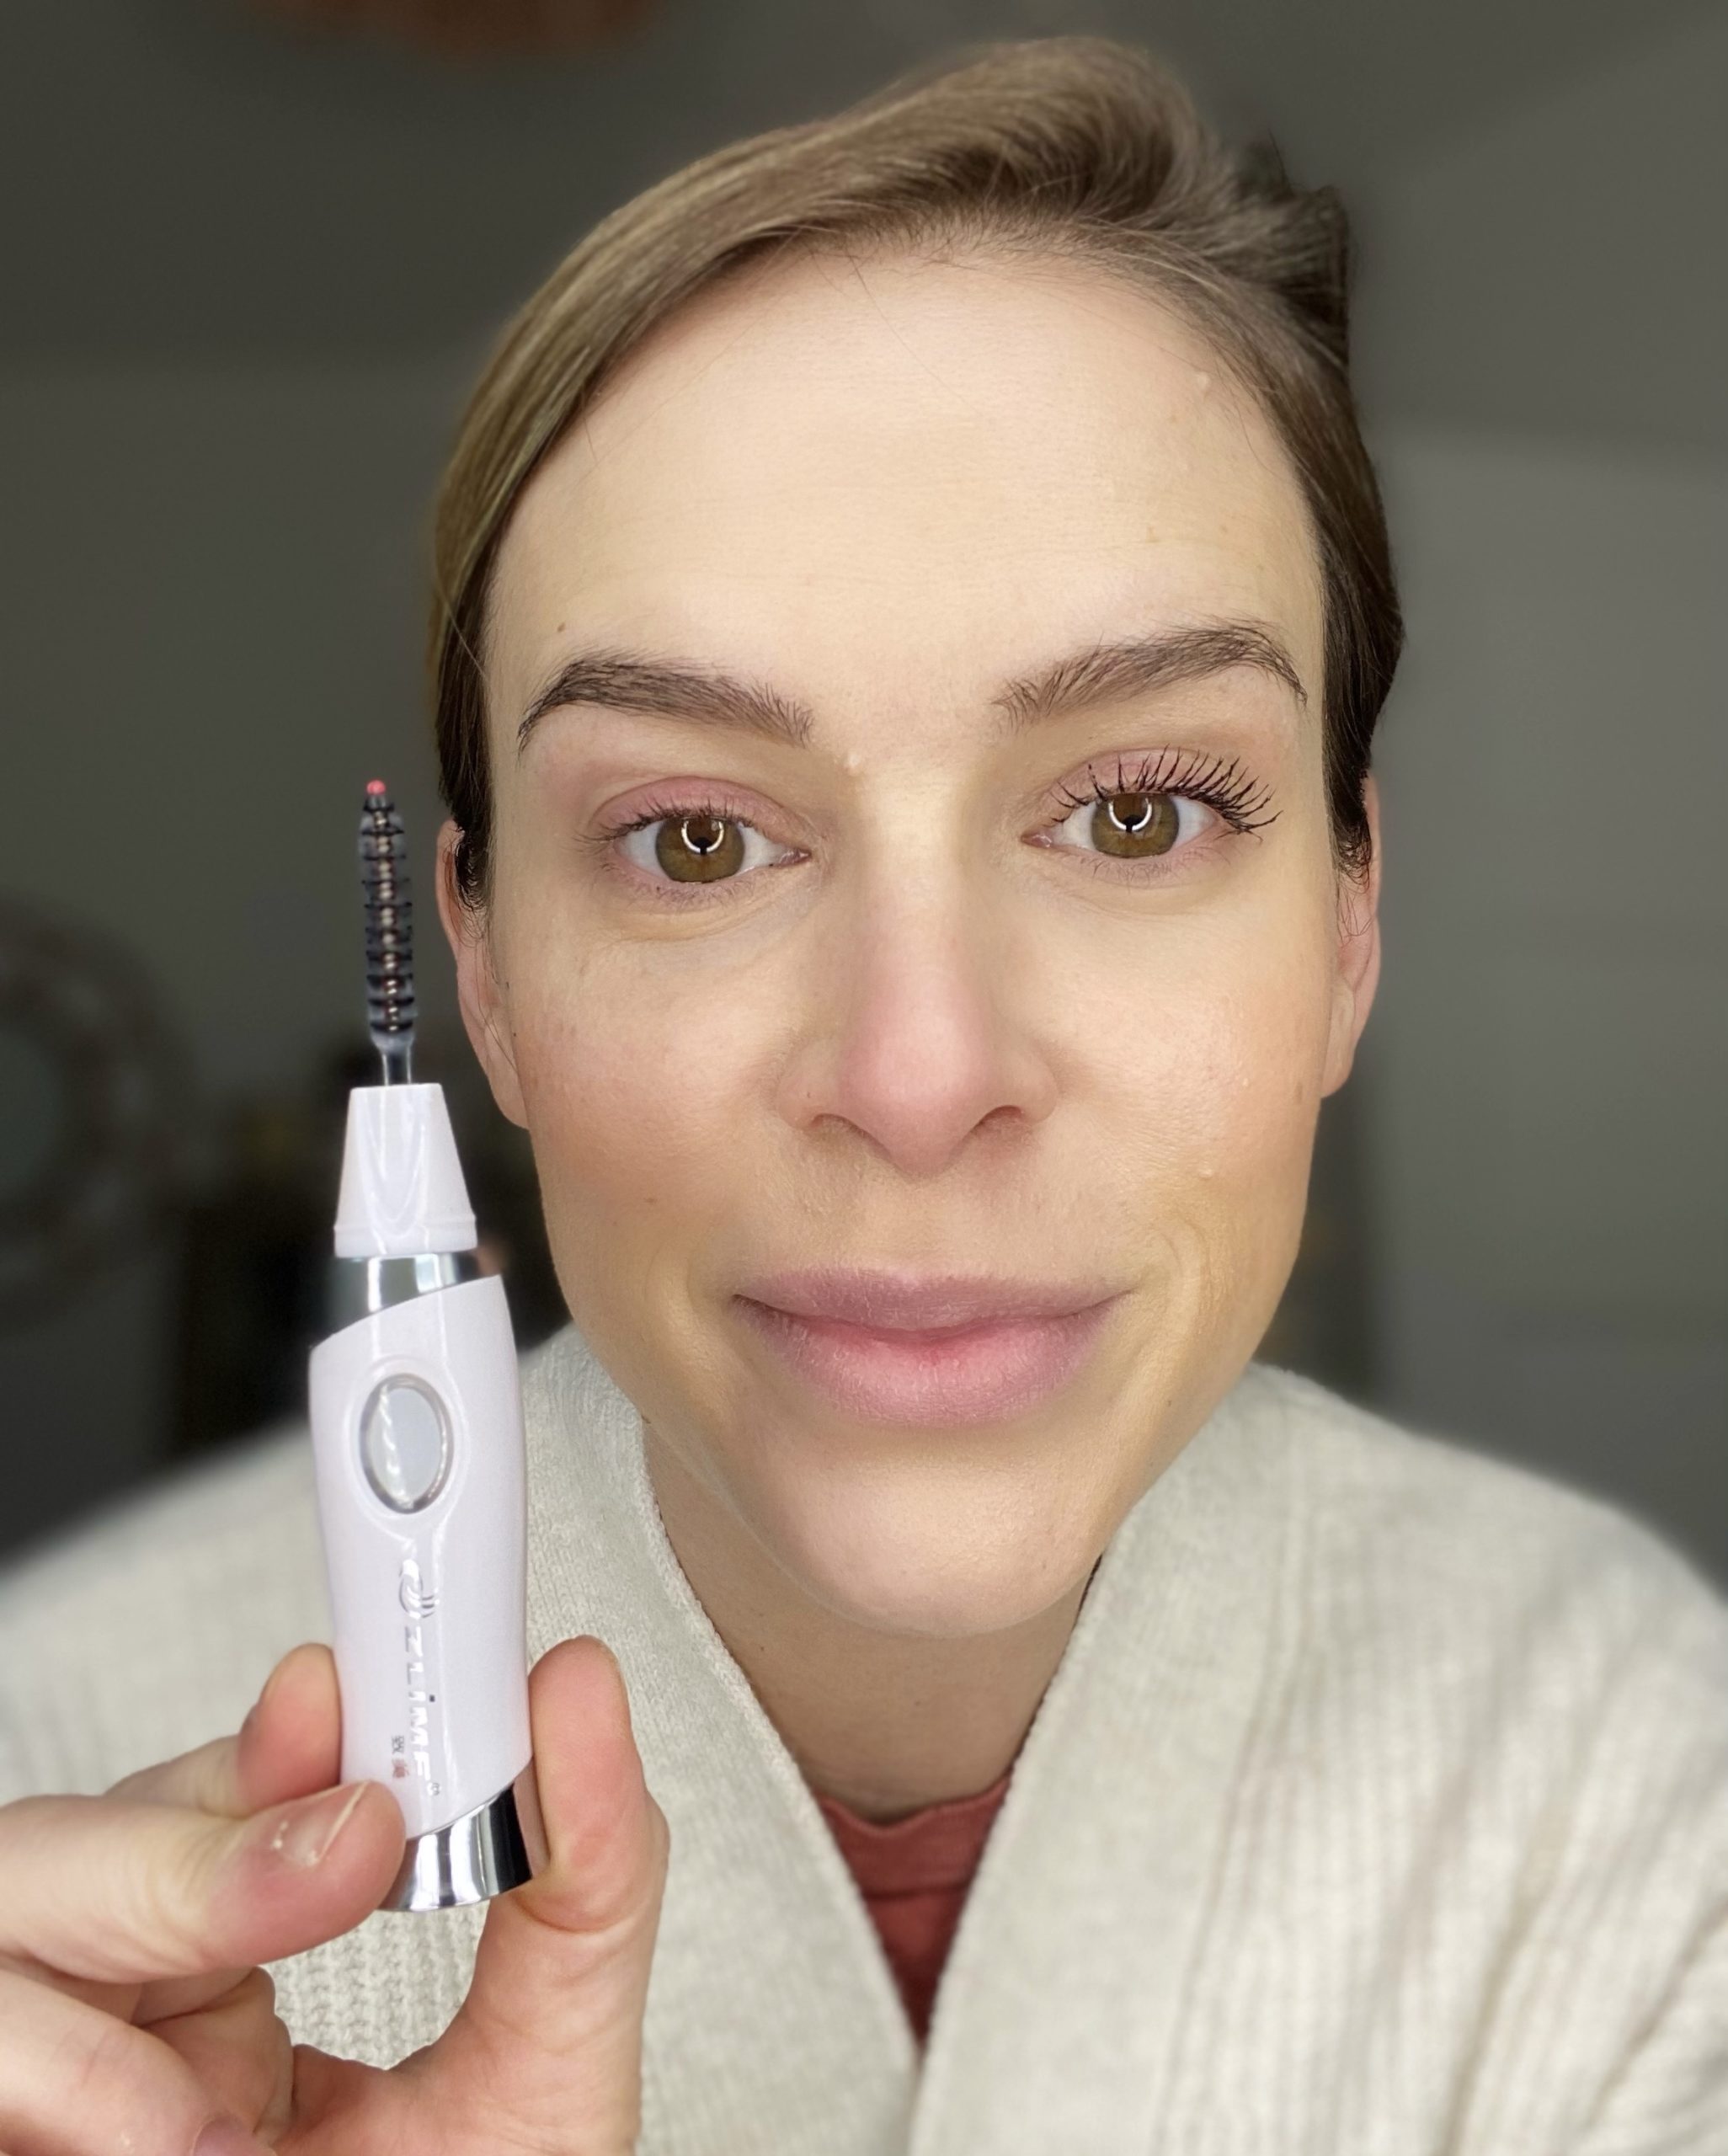 woman with ZLime Electric Eyelash Curler showing before and after use